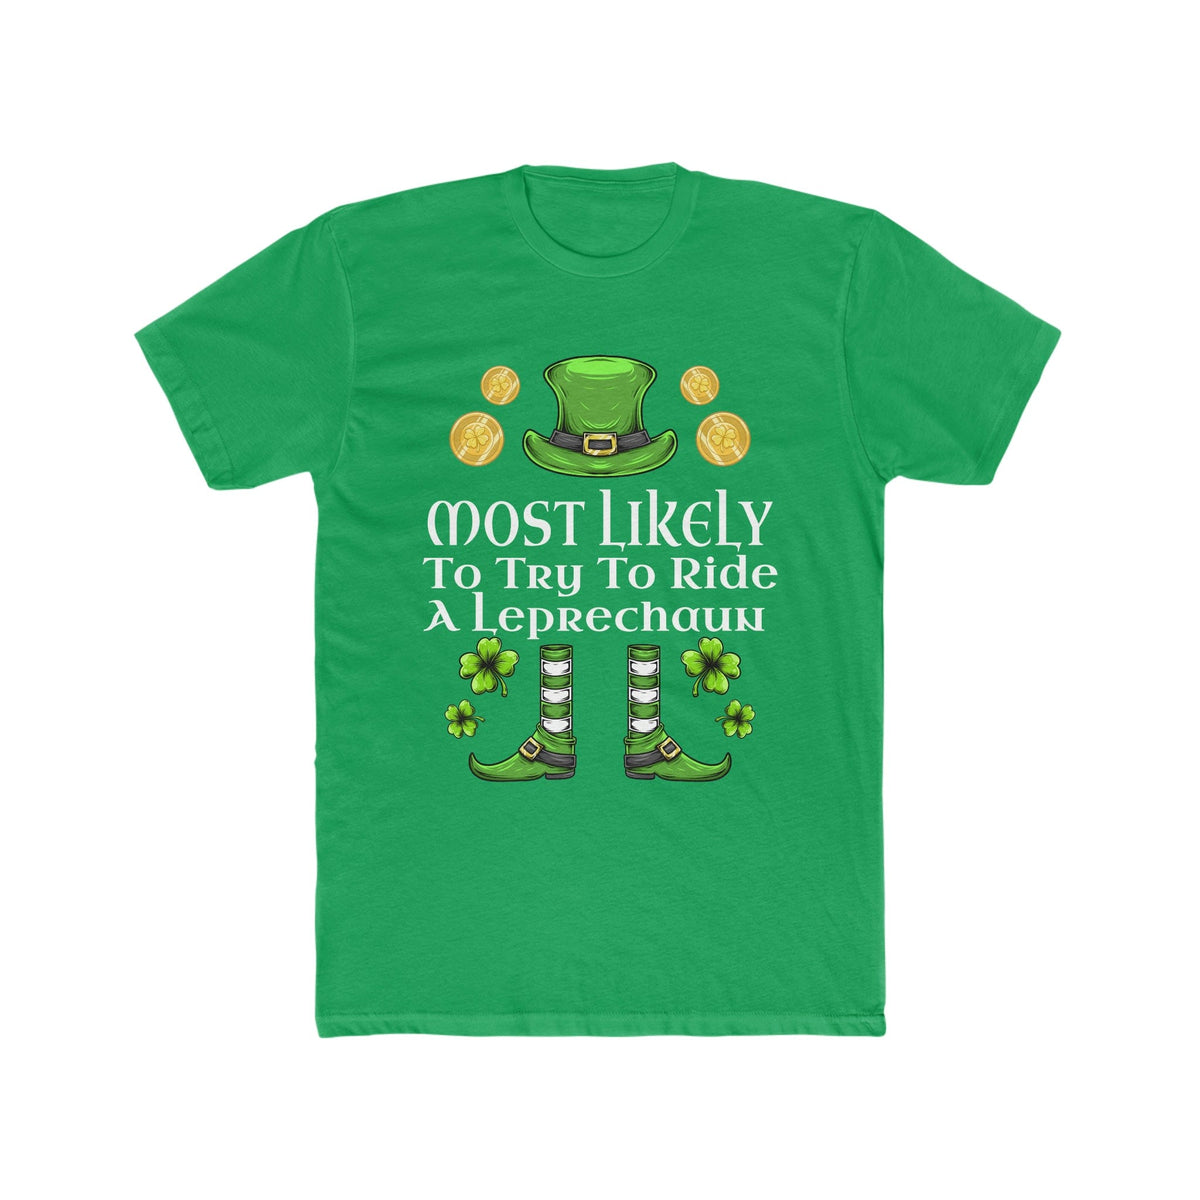 Most likely To Try To Ride A Leprechaun  Premium Unisex Shirt